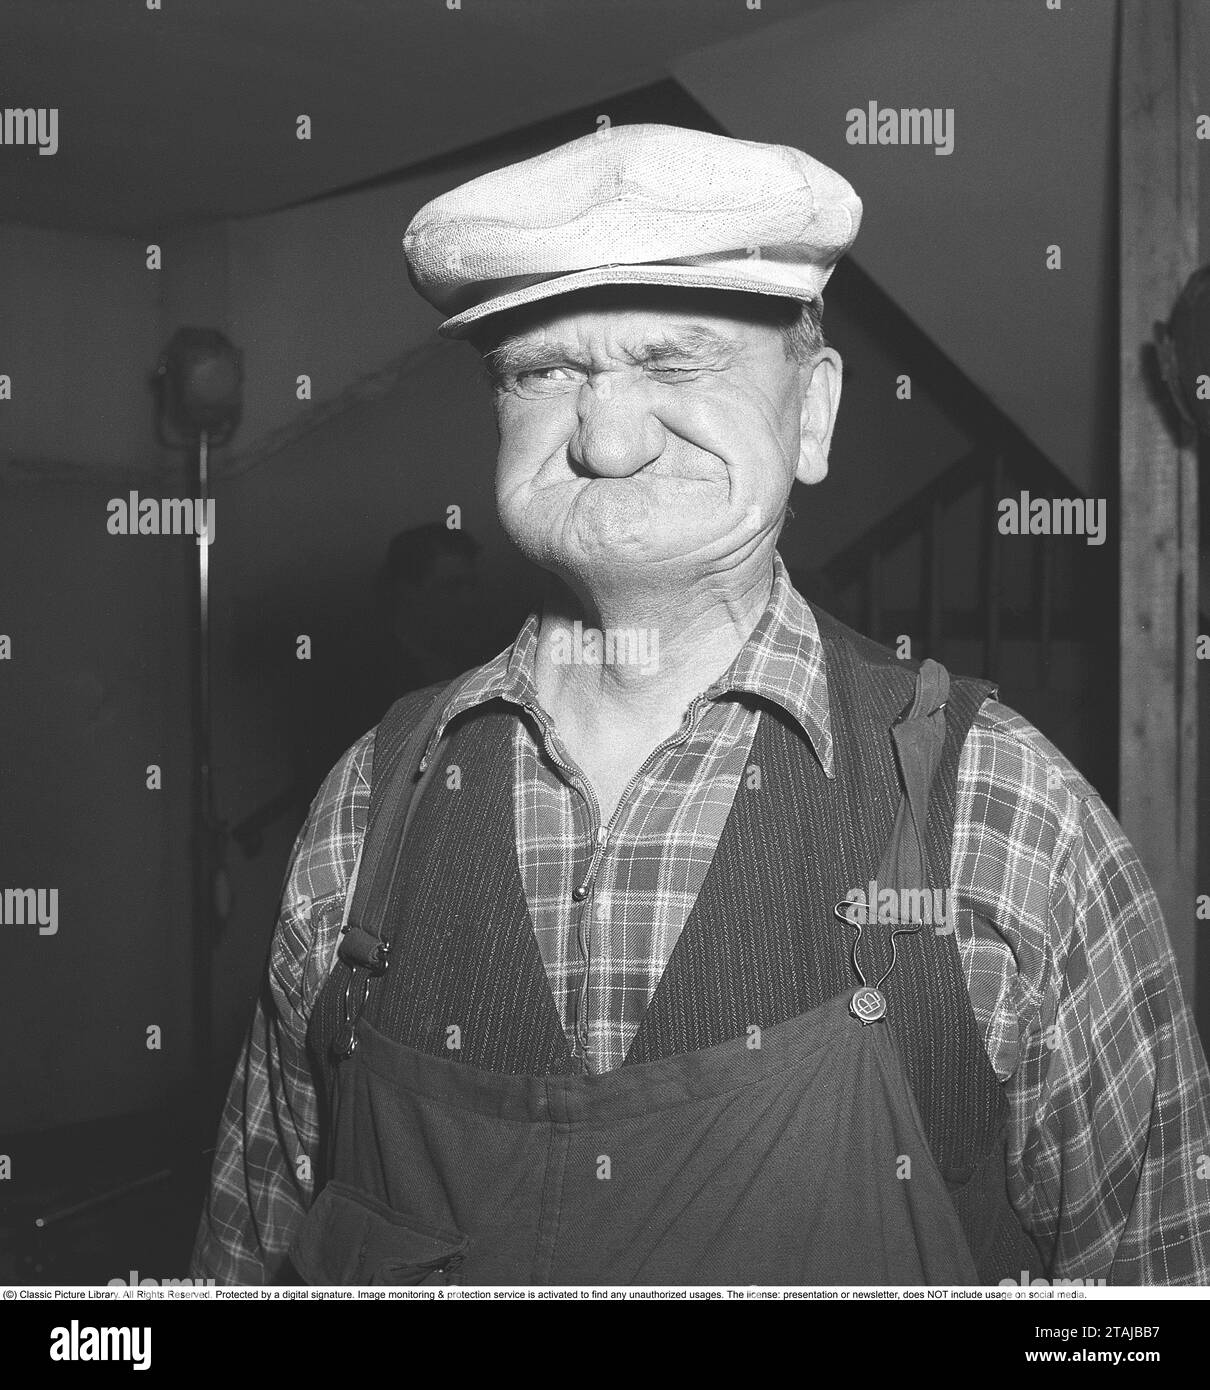 In the 1940s.  The elderly man has a white cap on his head and makes a funny face. Sweden 1947. ref AA46-3 Stock Photo